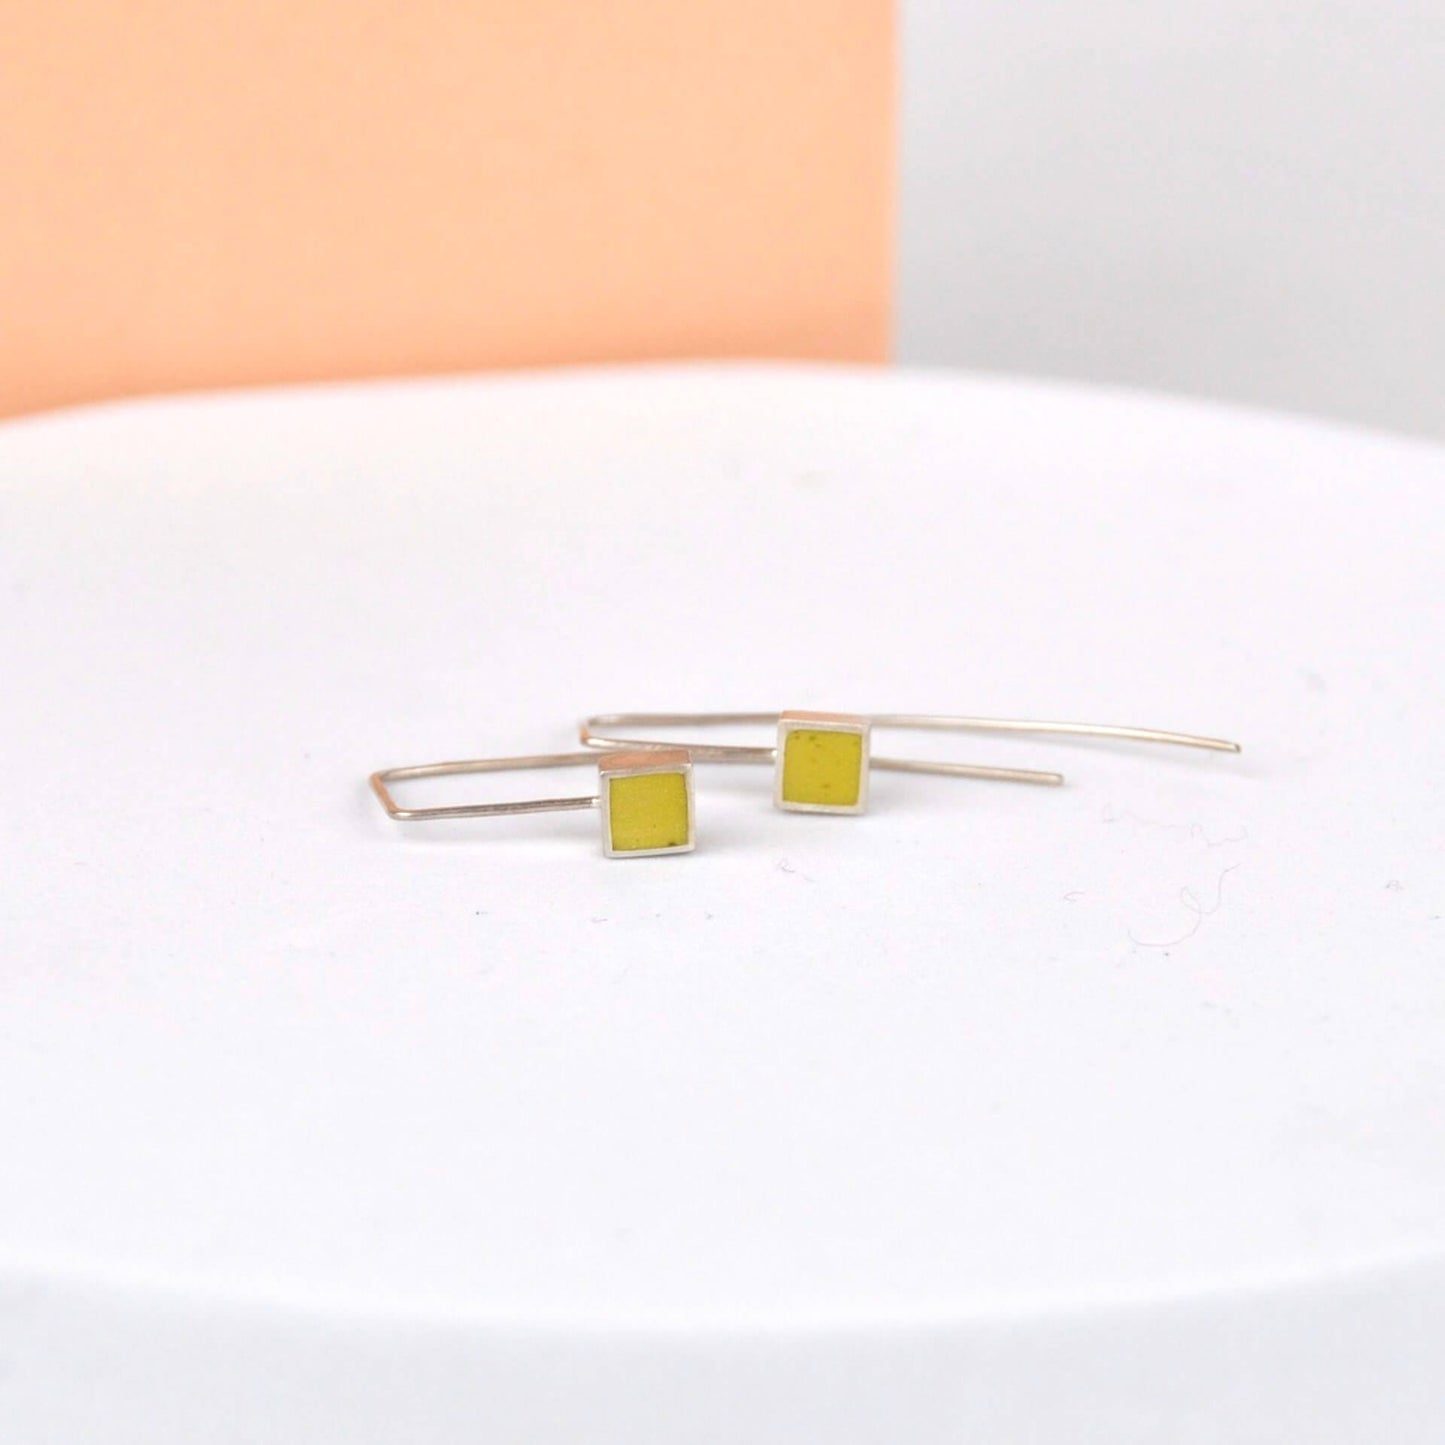 Clare Lloyd Earrings Yellow Contemporary Square Wire Earrings (various colours)